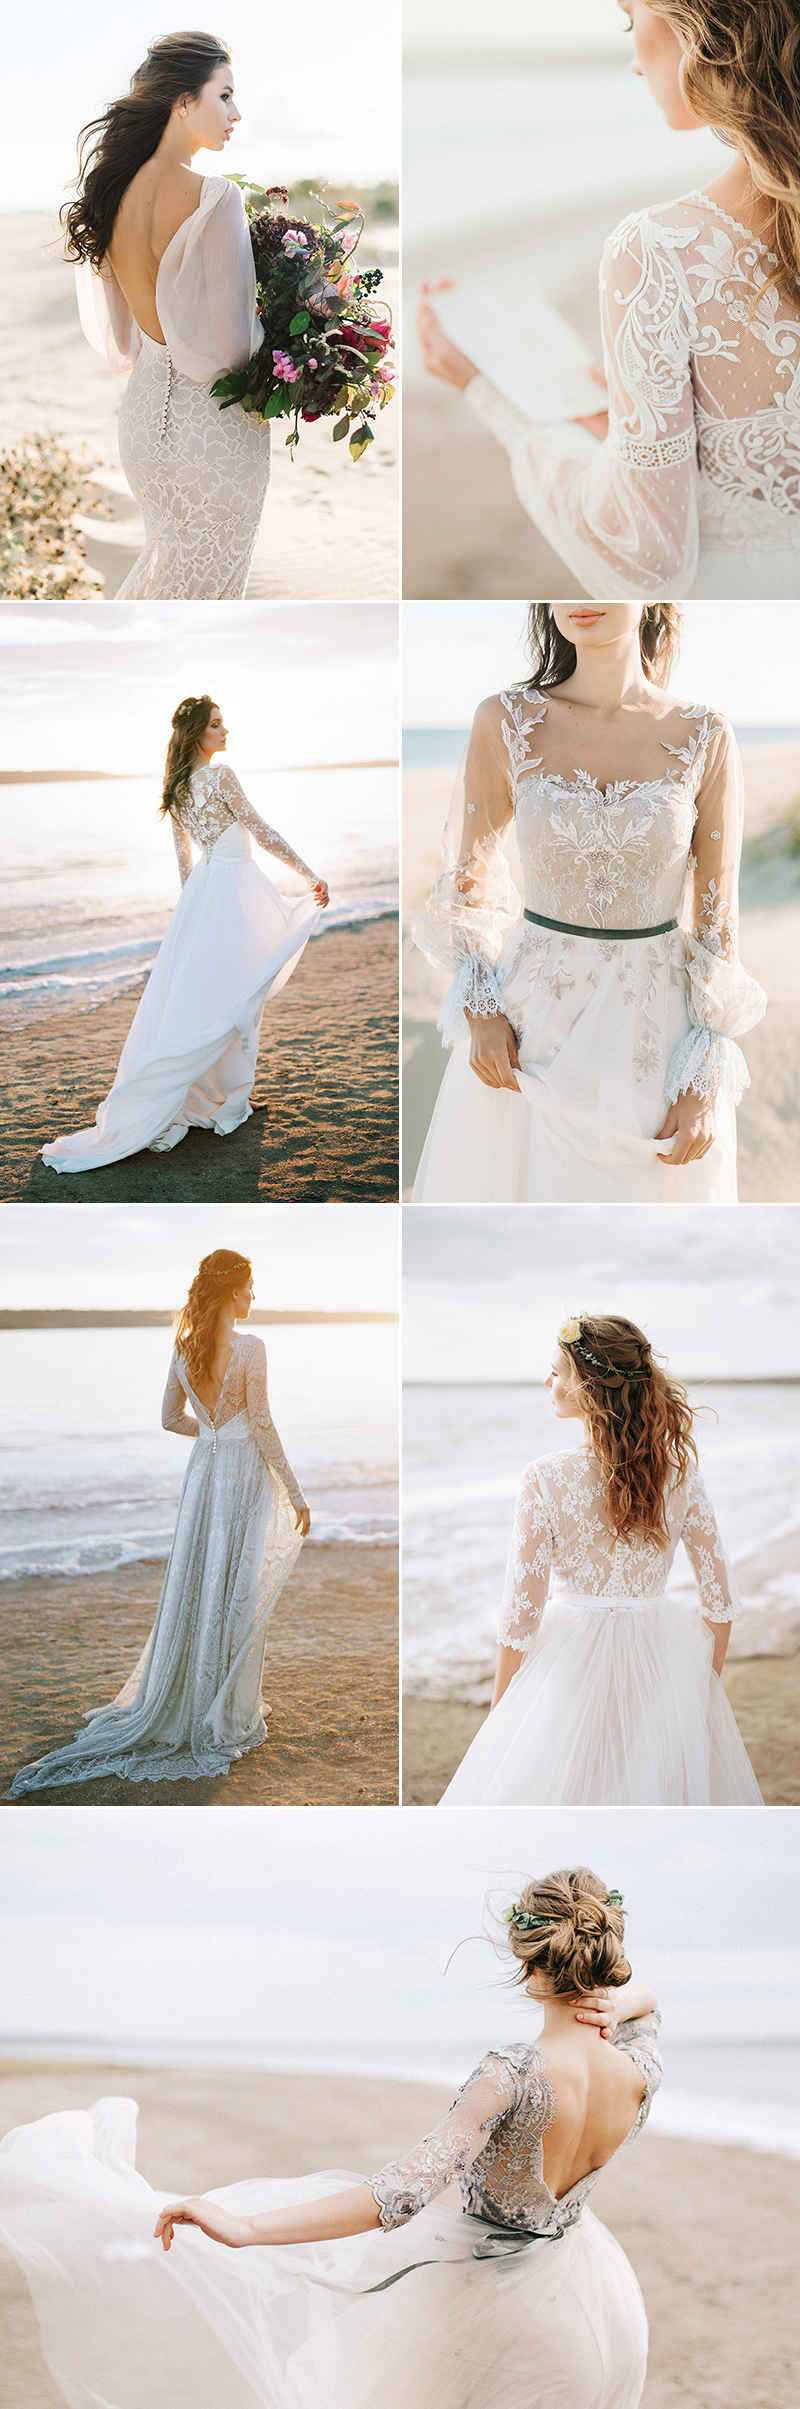 wedding dress styles from real brides - long sleeve